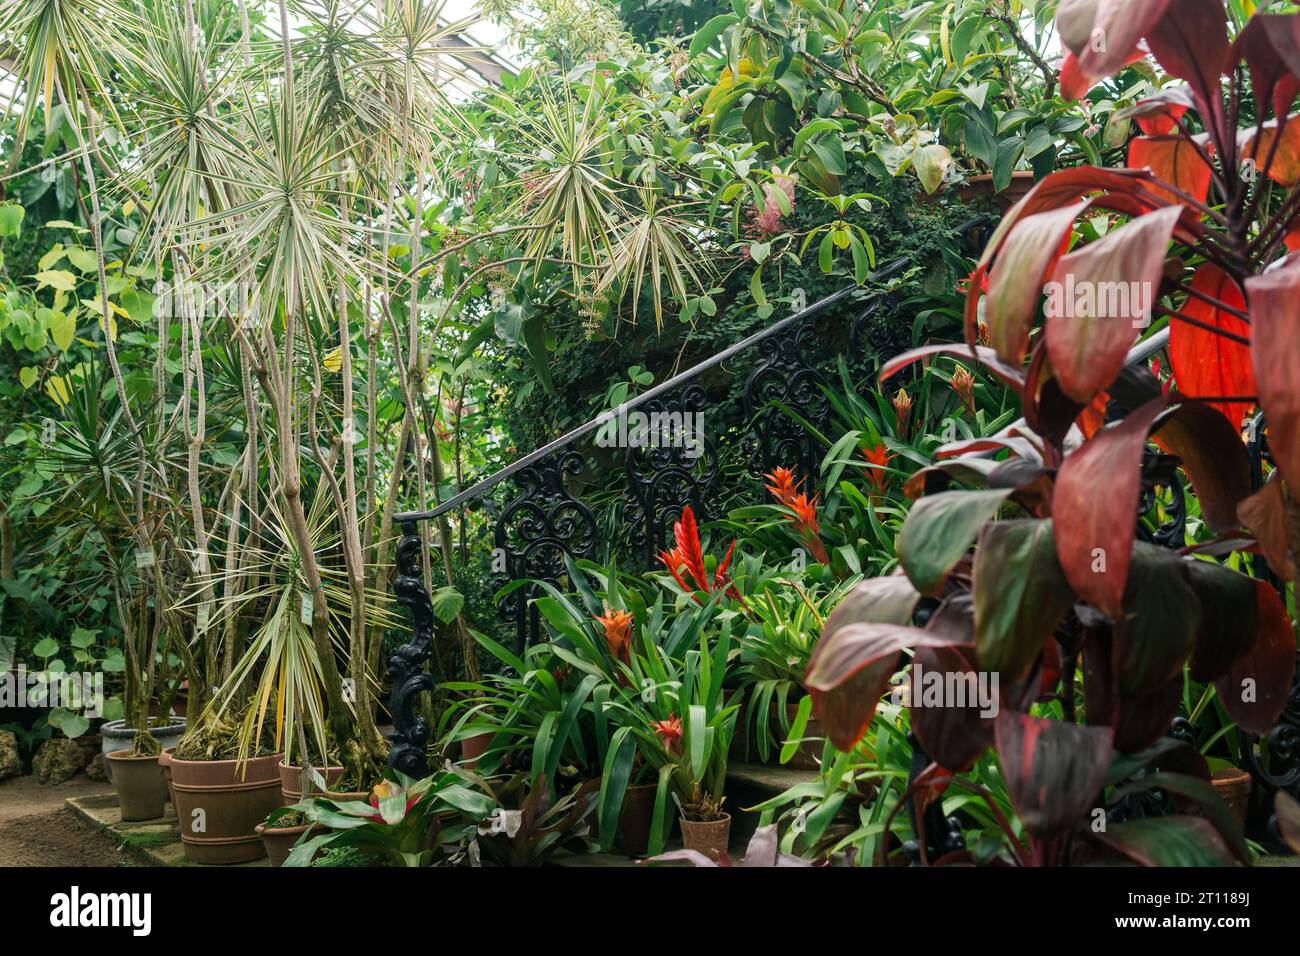 blooming bromeliads in pots on the steps of a vintage staircase among tropical plants in an old greenhouse Stock Photo